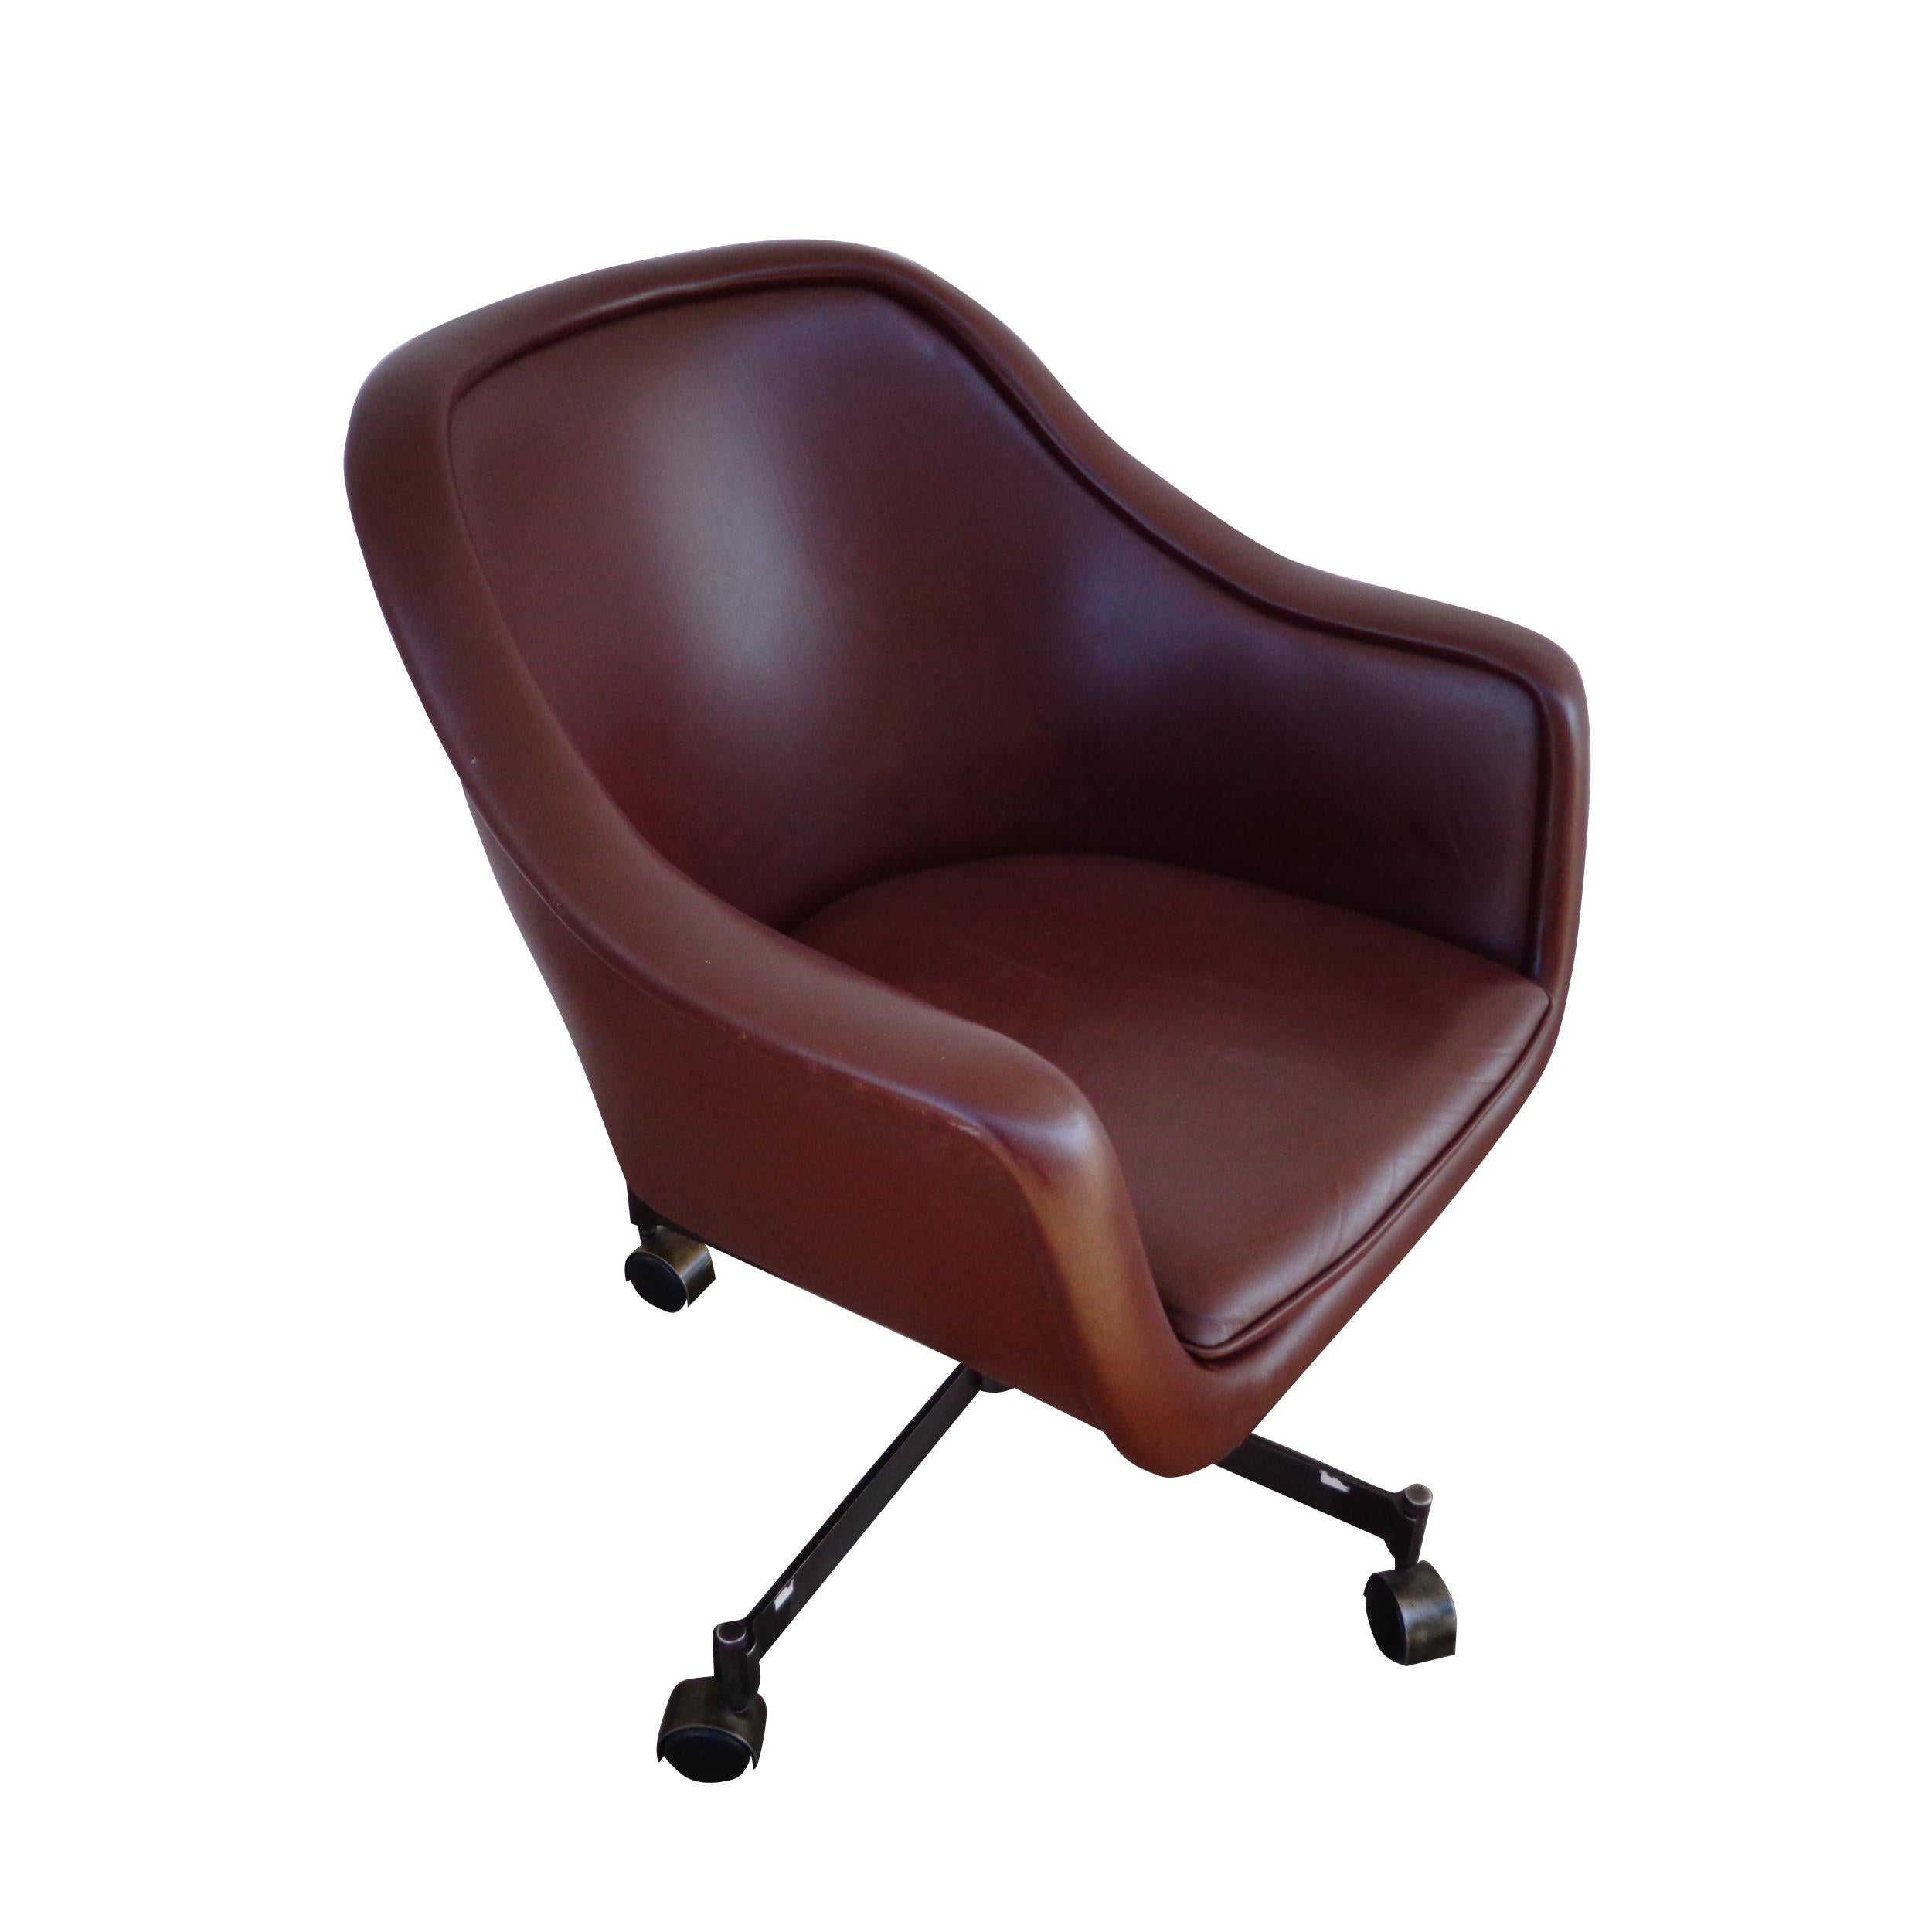 Ward Bennett for Brickel and associates barrel-back leather chair 30 available 


4-star anodized bronze base swivel conference room chair in a rich brown leather.

Chair swivels and is height adjustable. 8 Available.